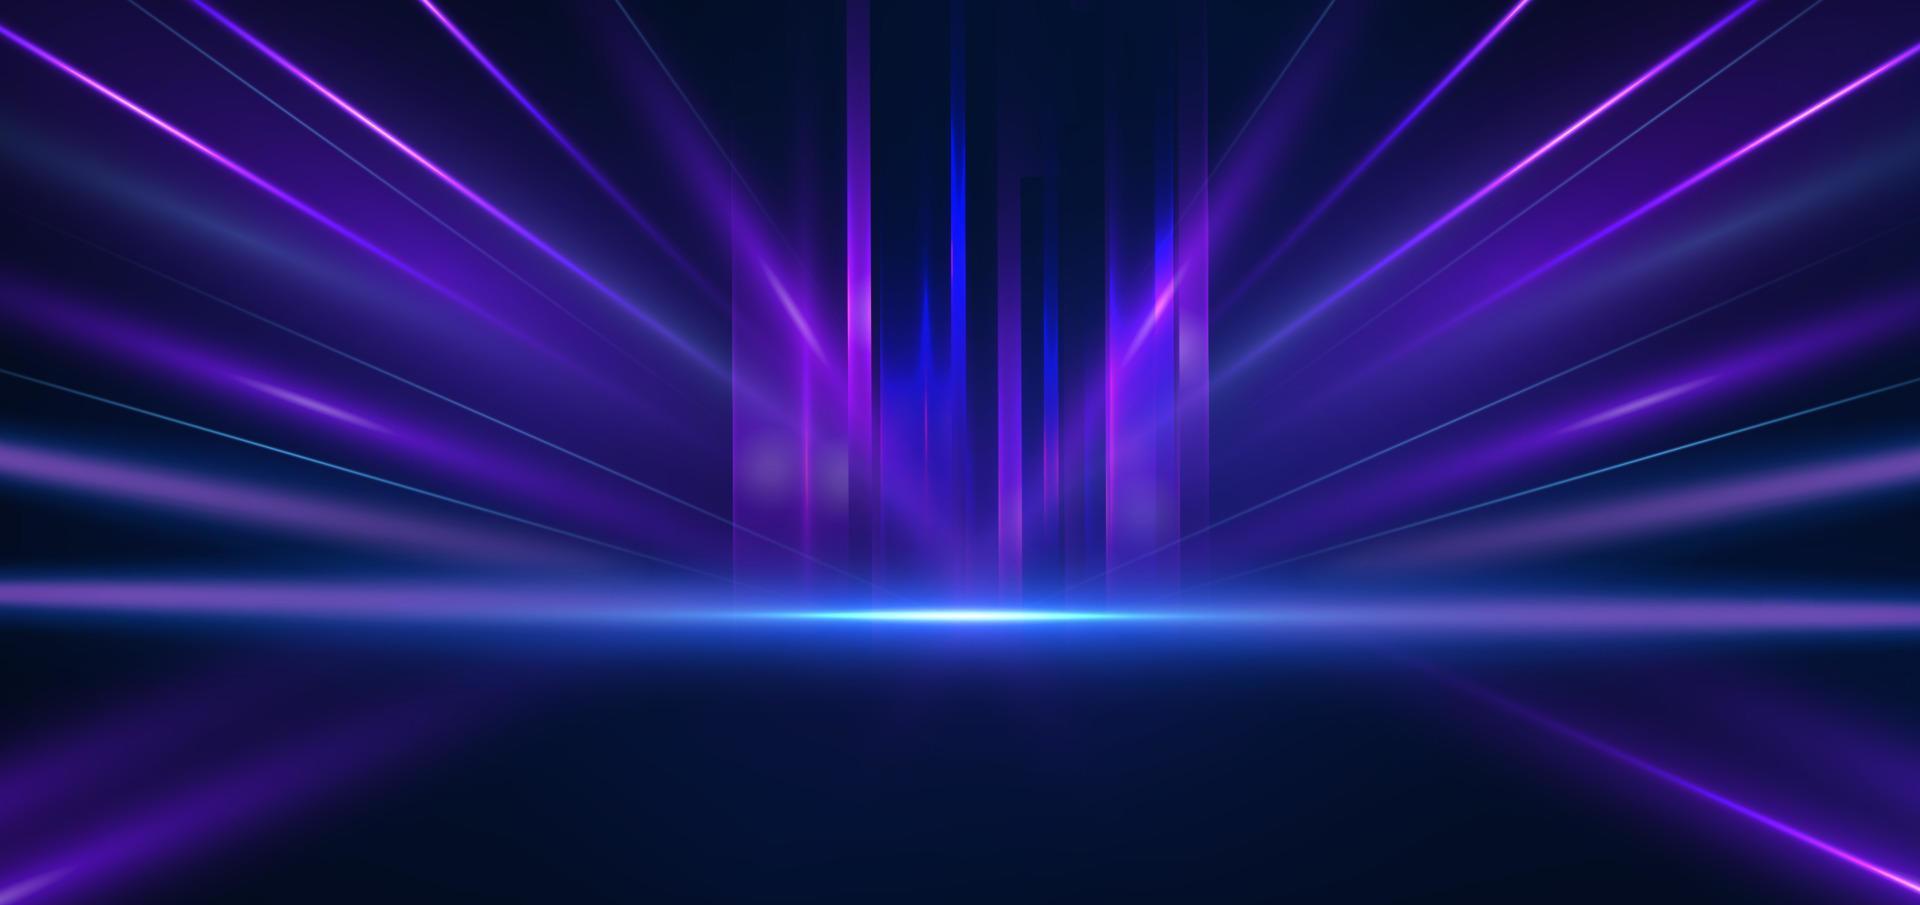 Abstract technology futuristic glowing blue and purple light lines with speed motion blur effect on dark blue background. vector